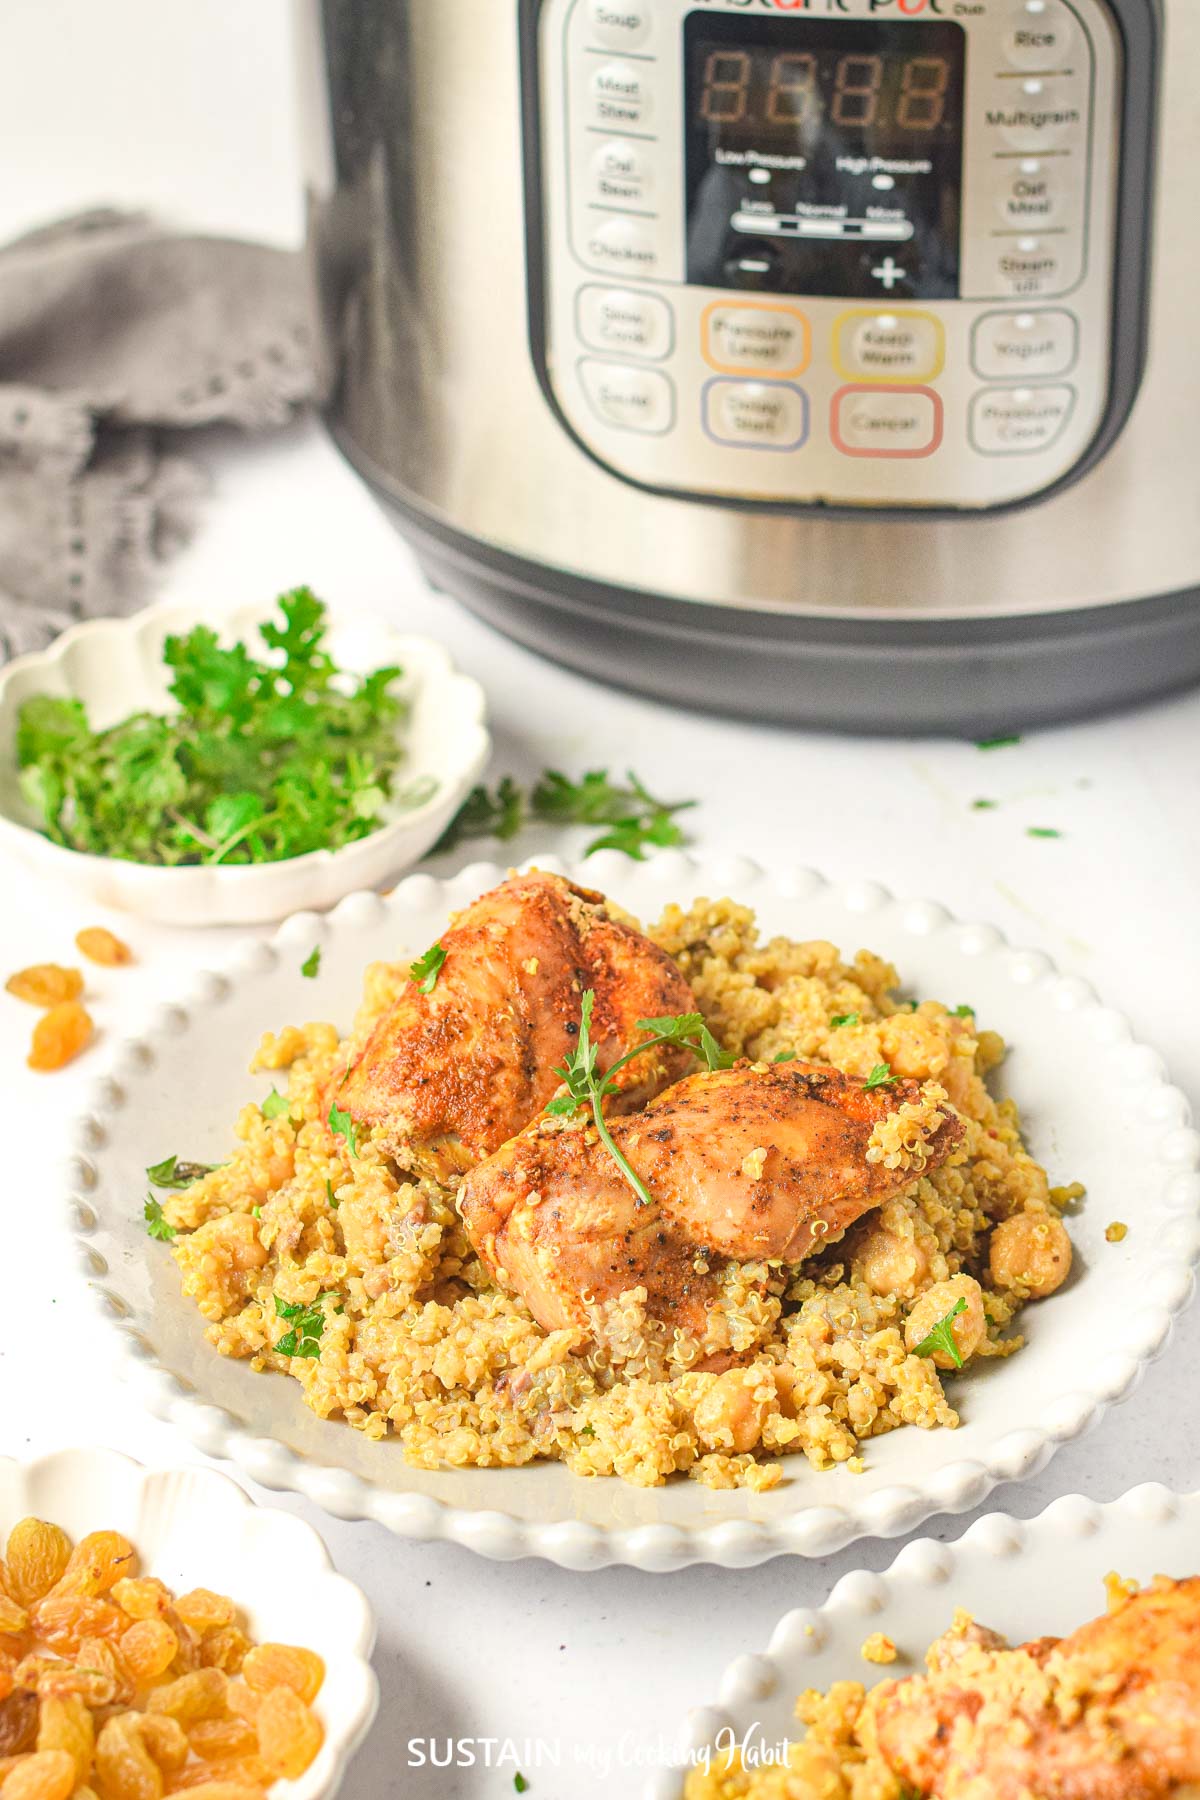 Instant Pot Moroccan chicken served on a plate.